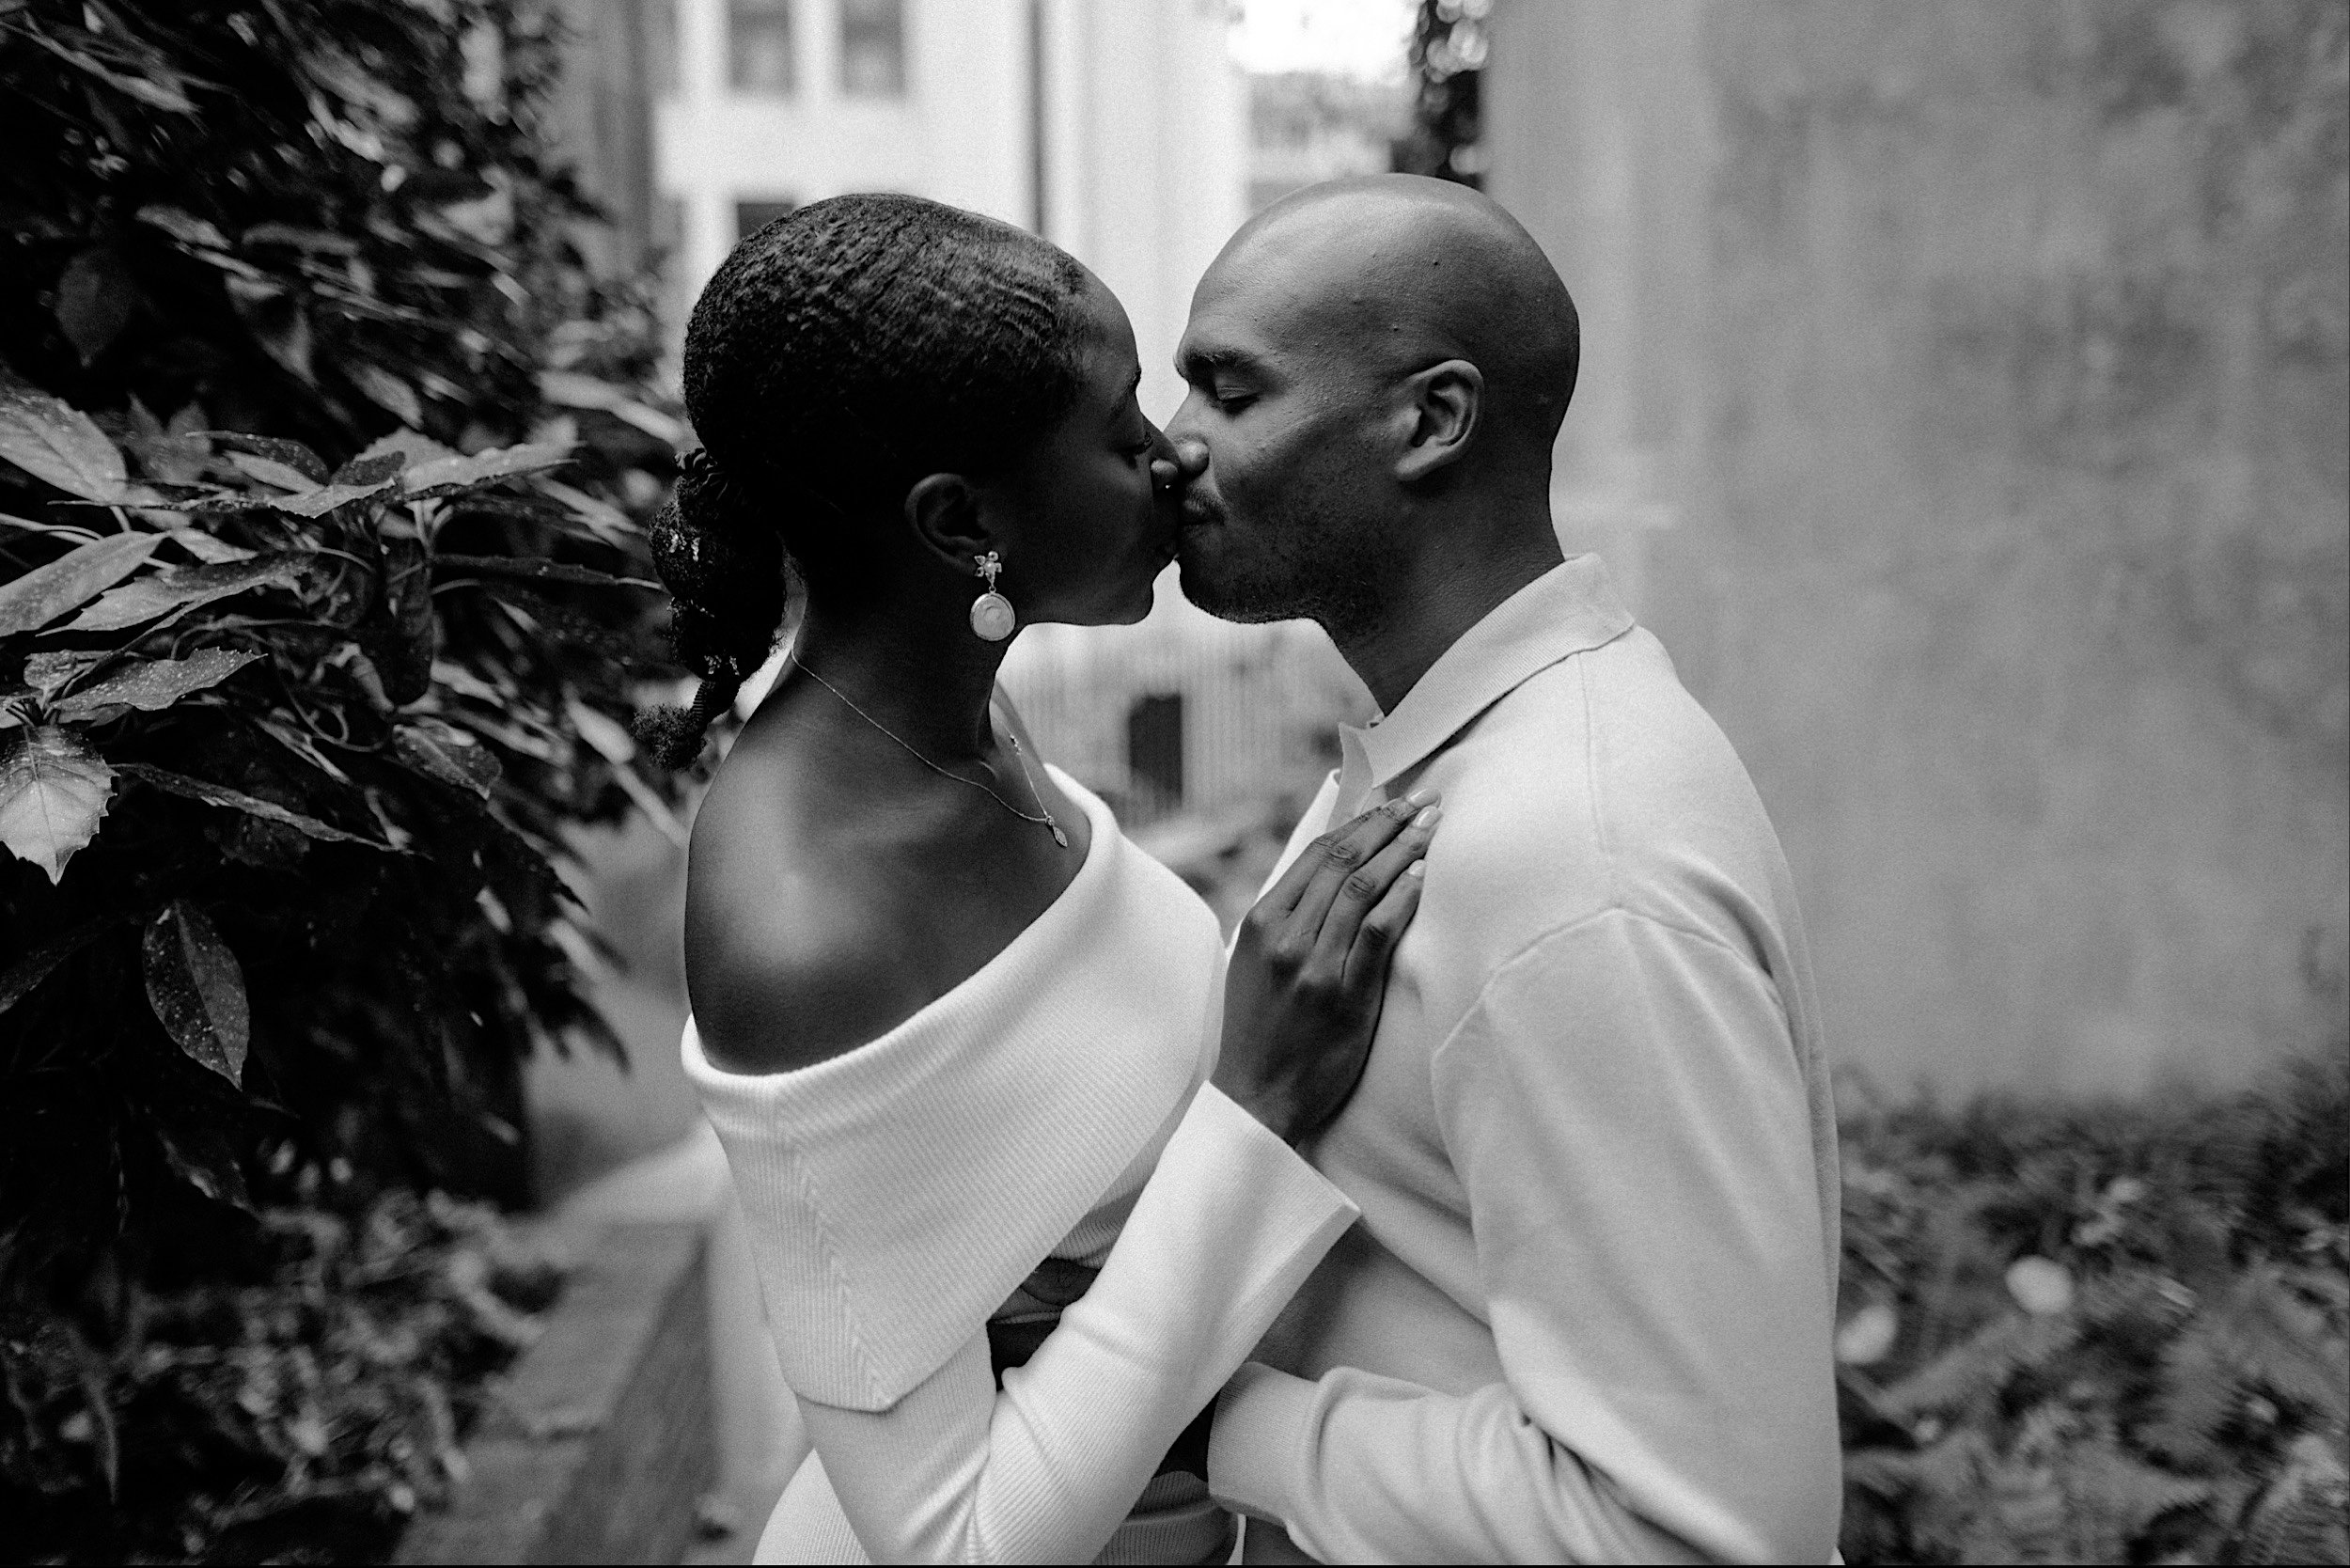 09_St-Dunstans-in-the-east-pre-wedding-shoot0012_Gorgeous black model couple in love share intimate moment in st dunstan in the east.jpg